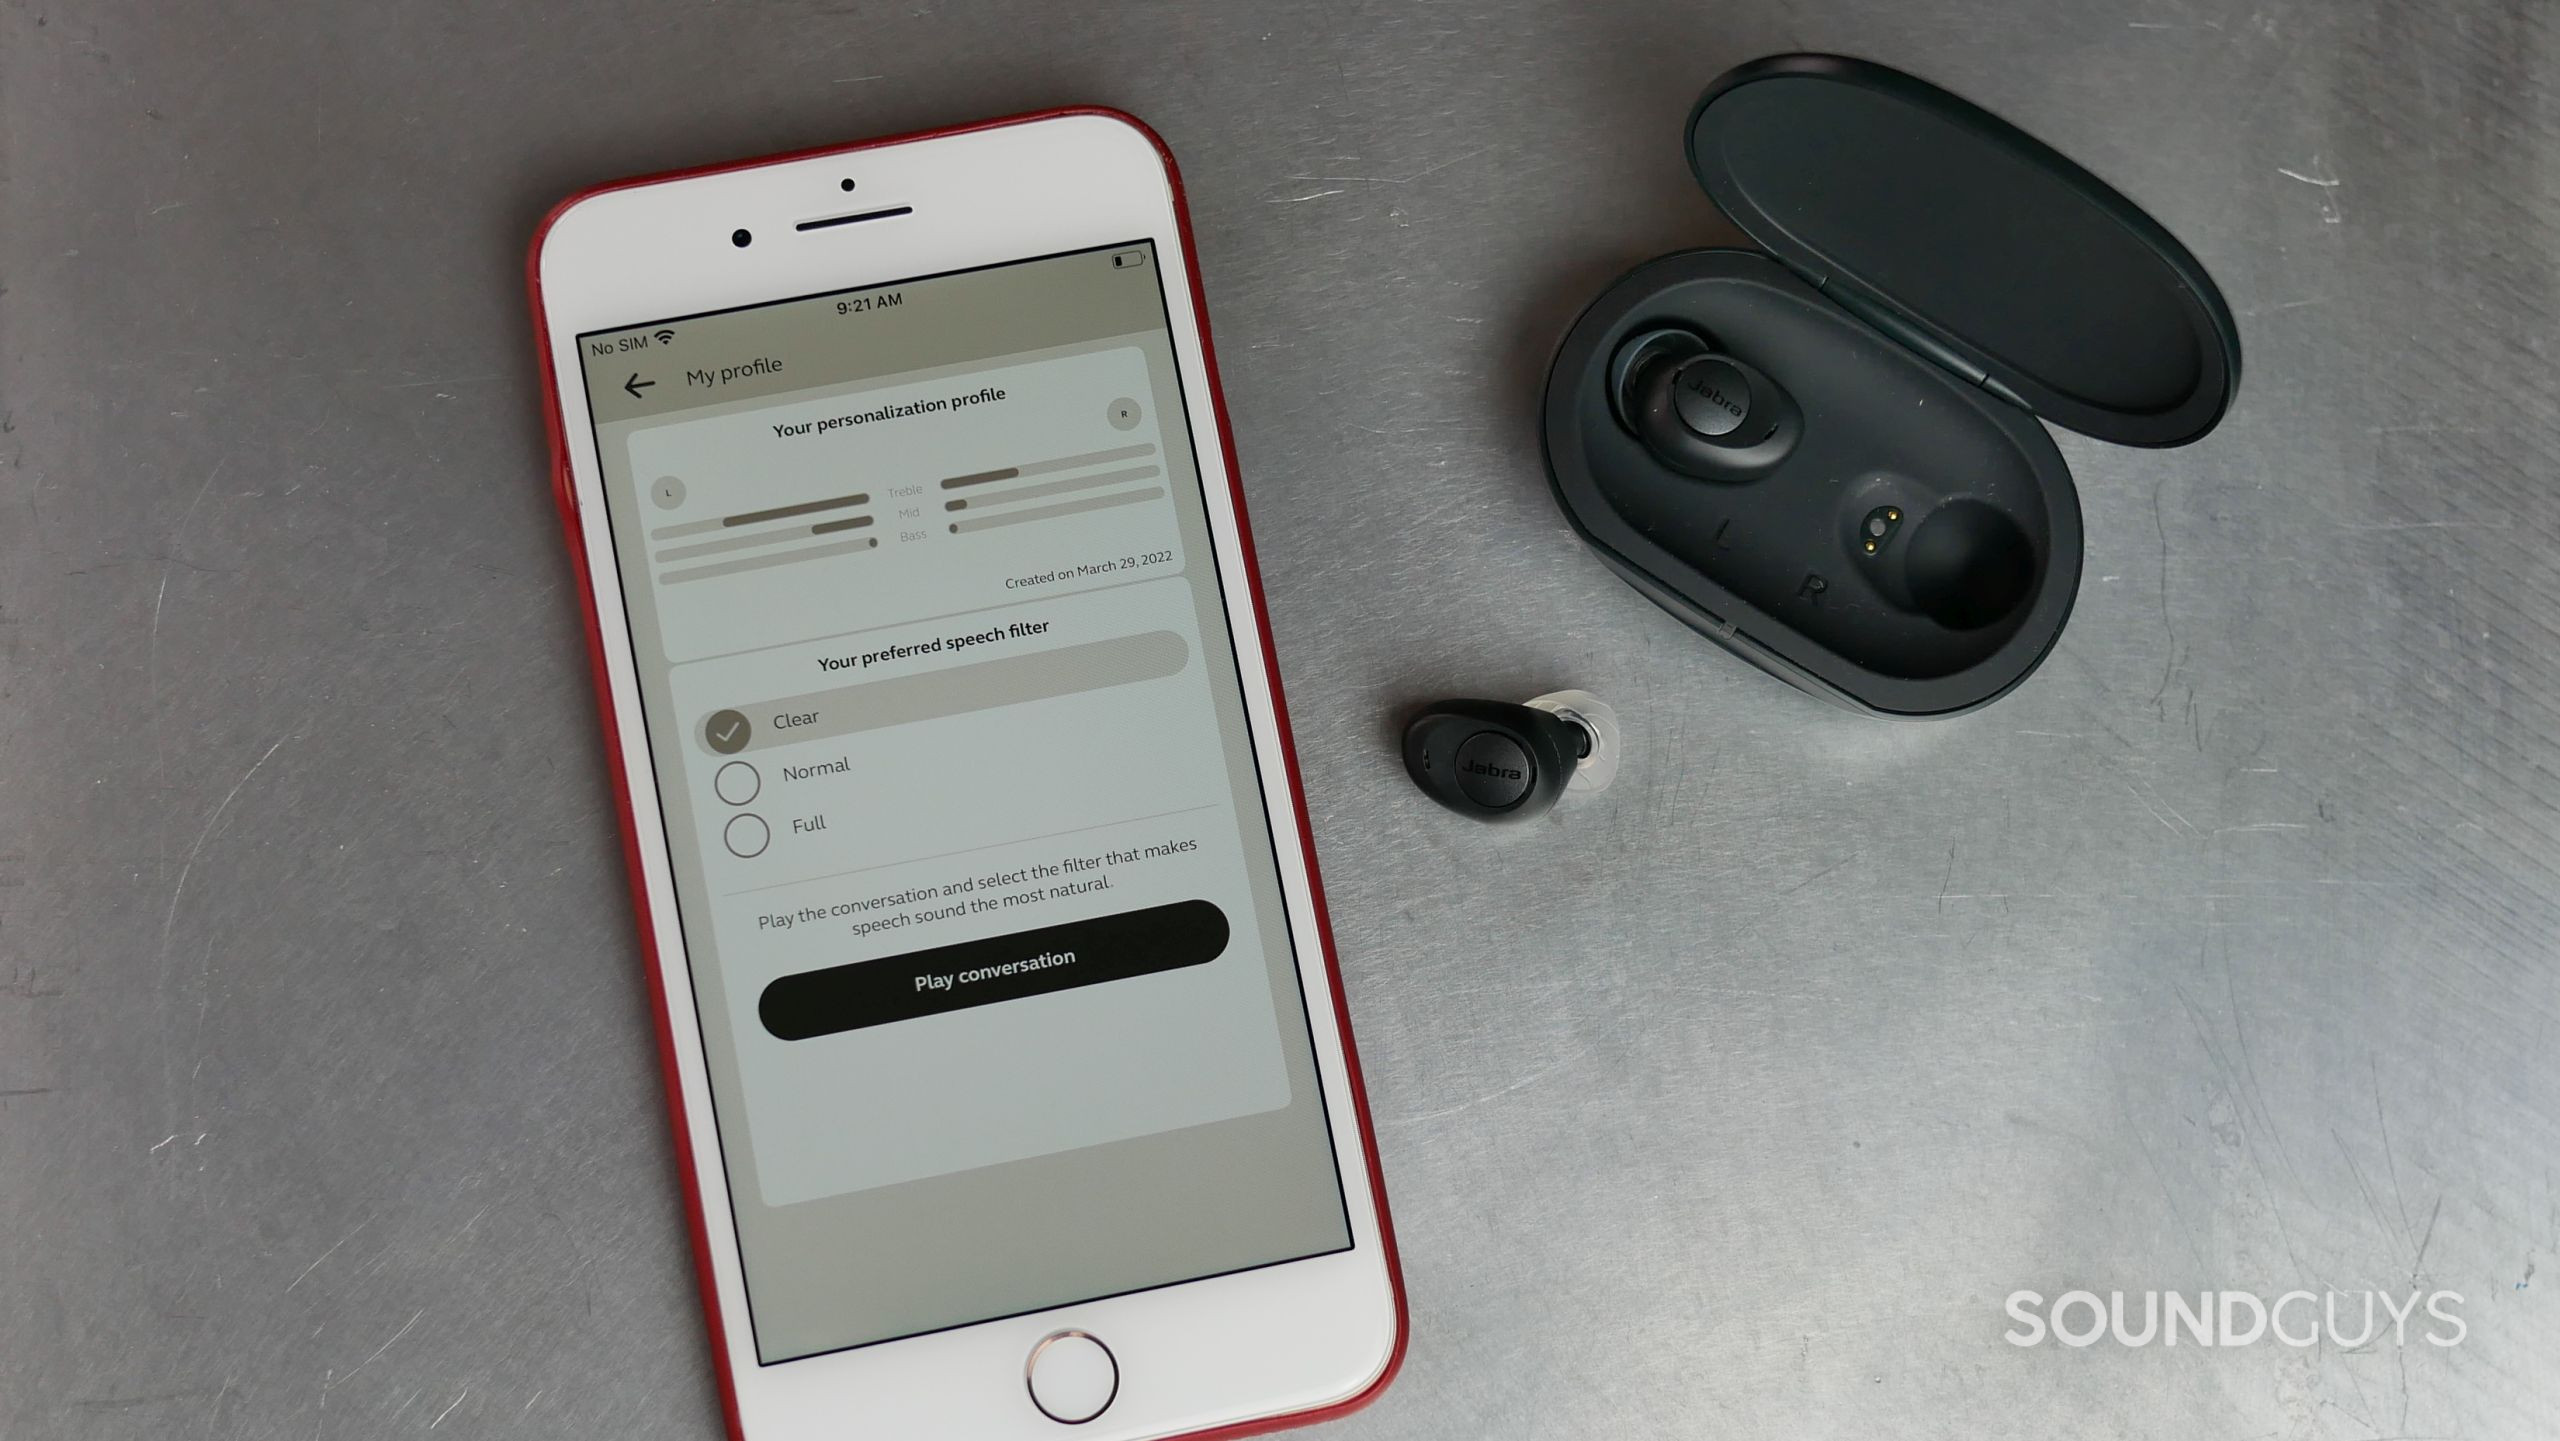 Jabra Enhance Plus earbuds and charging case with iPhone and Jabra Enhance app on personalization screen.